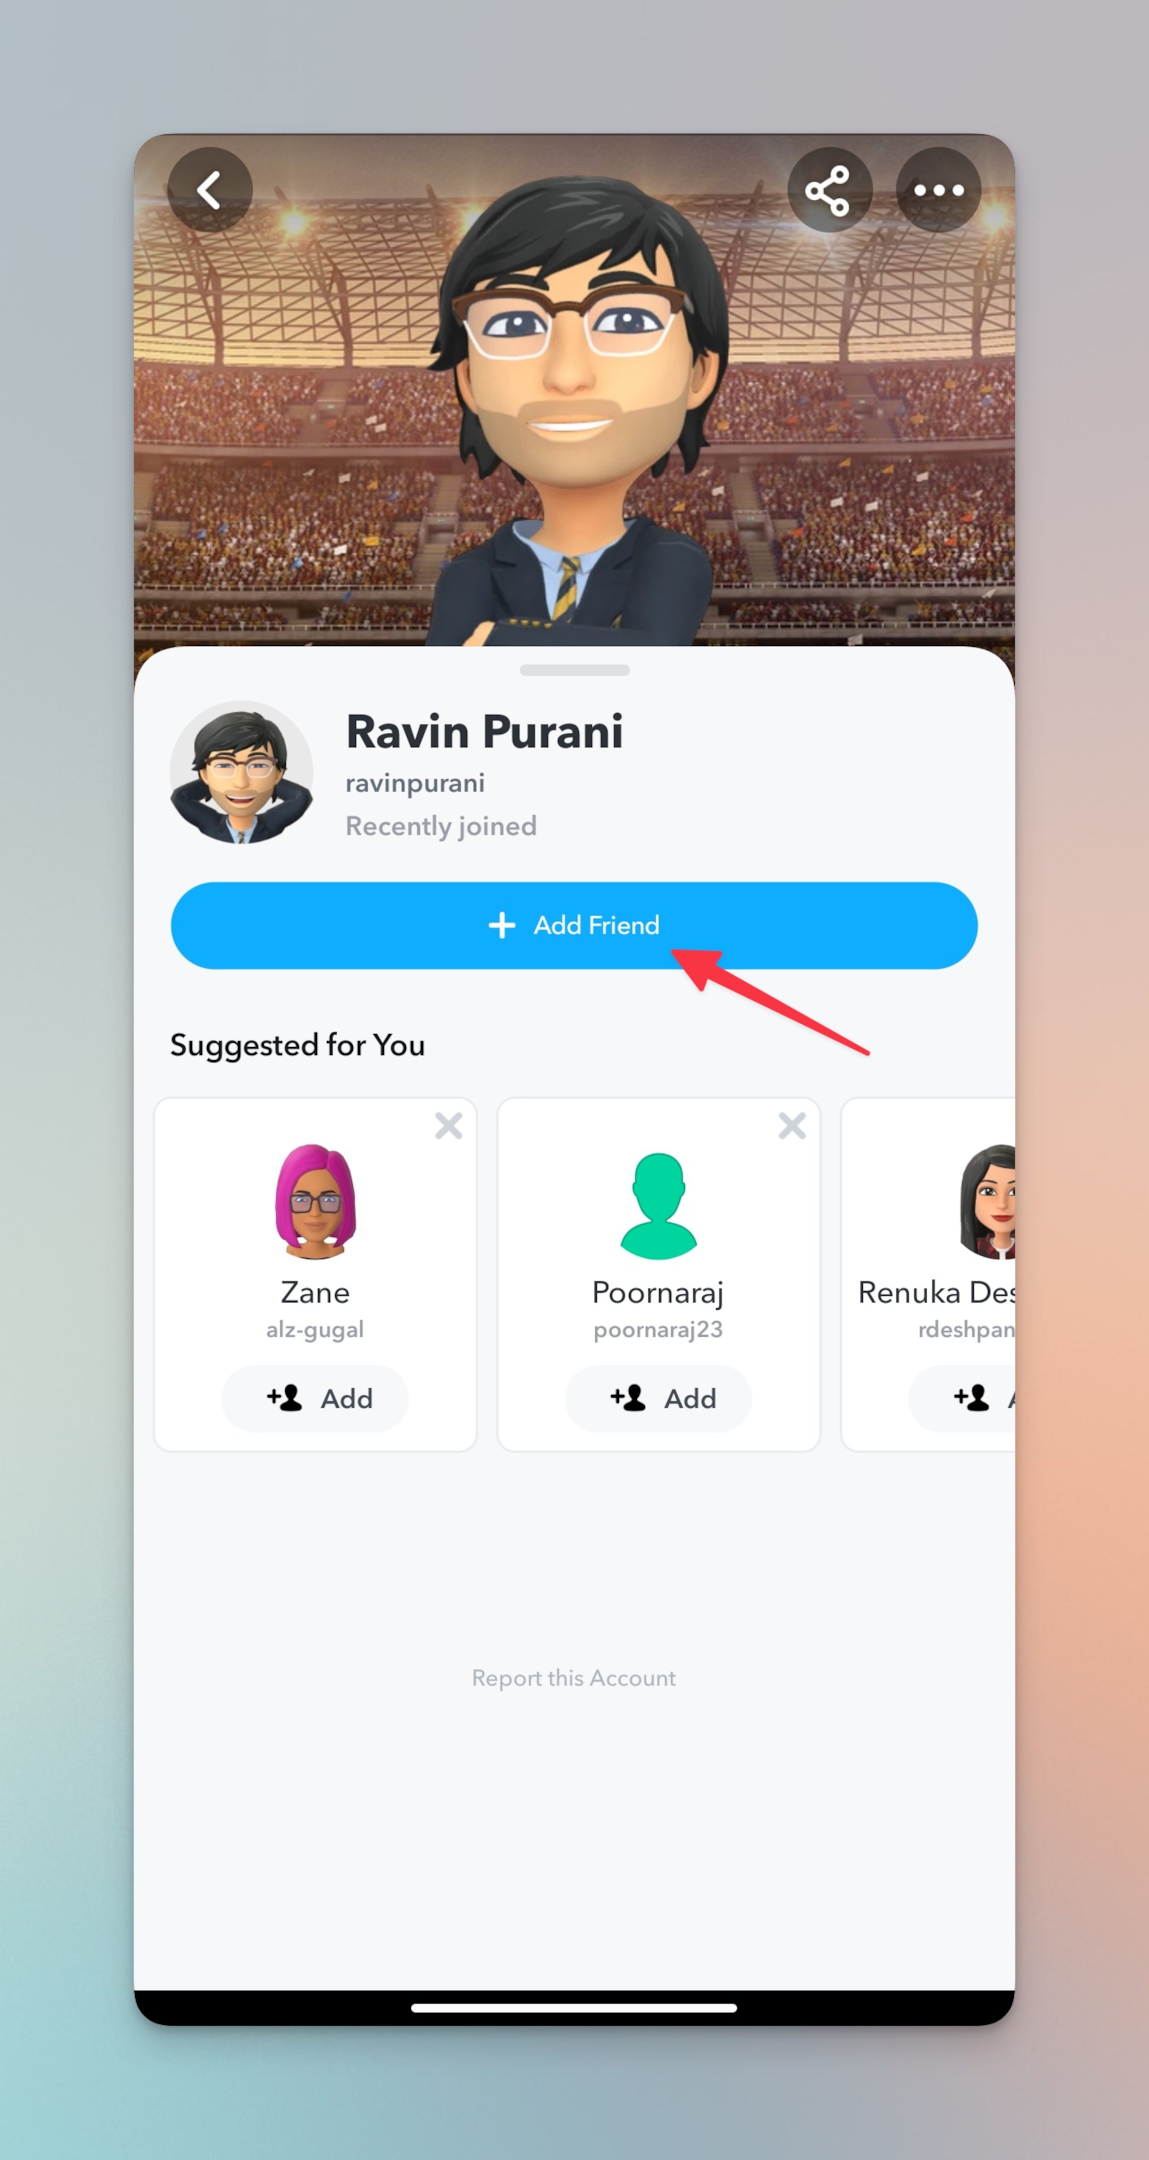 Remote.tools shows to tap the add friend button of a Recently Joined from your quick add list